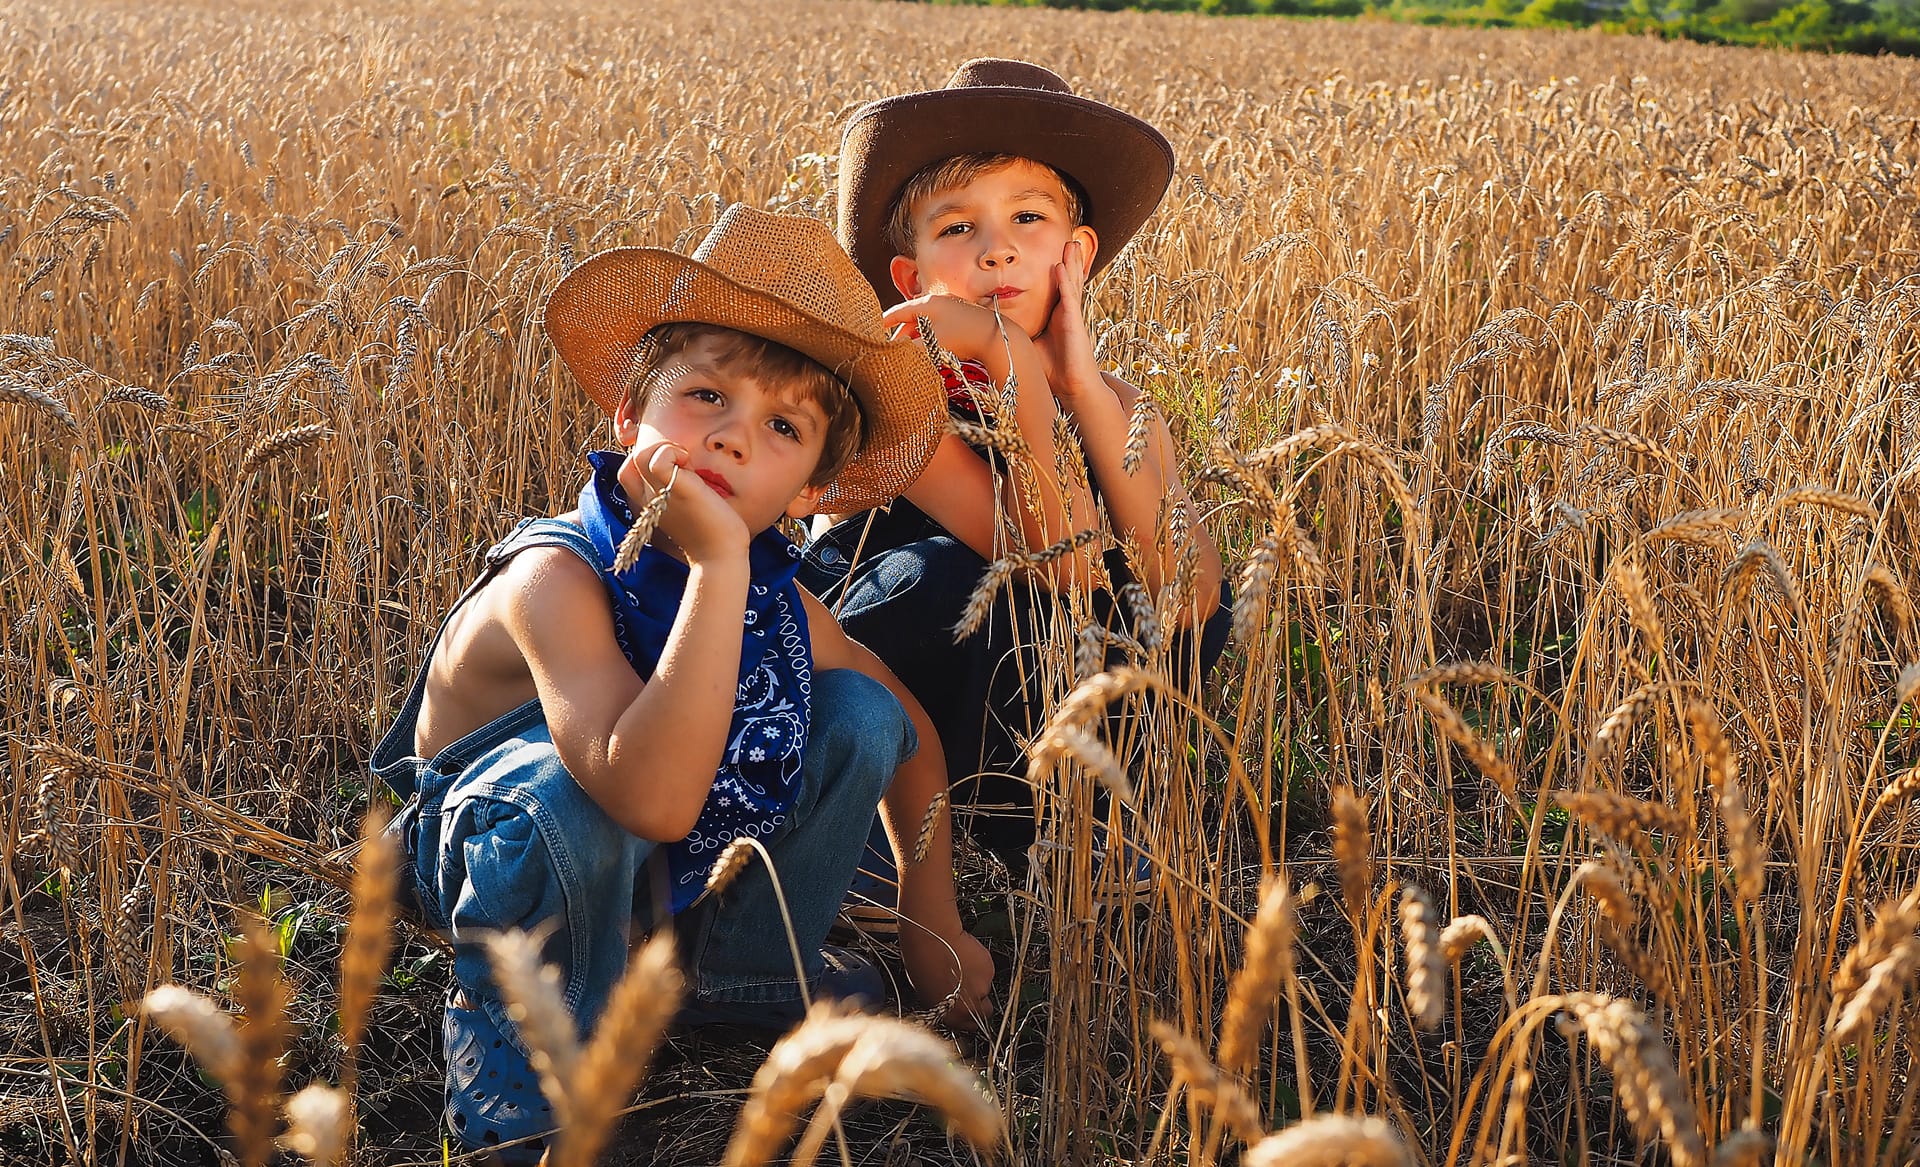 Little adorable cowboys sitting field wheat during daytime